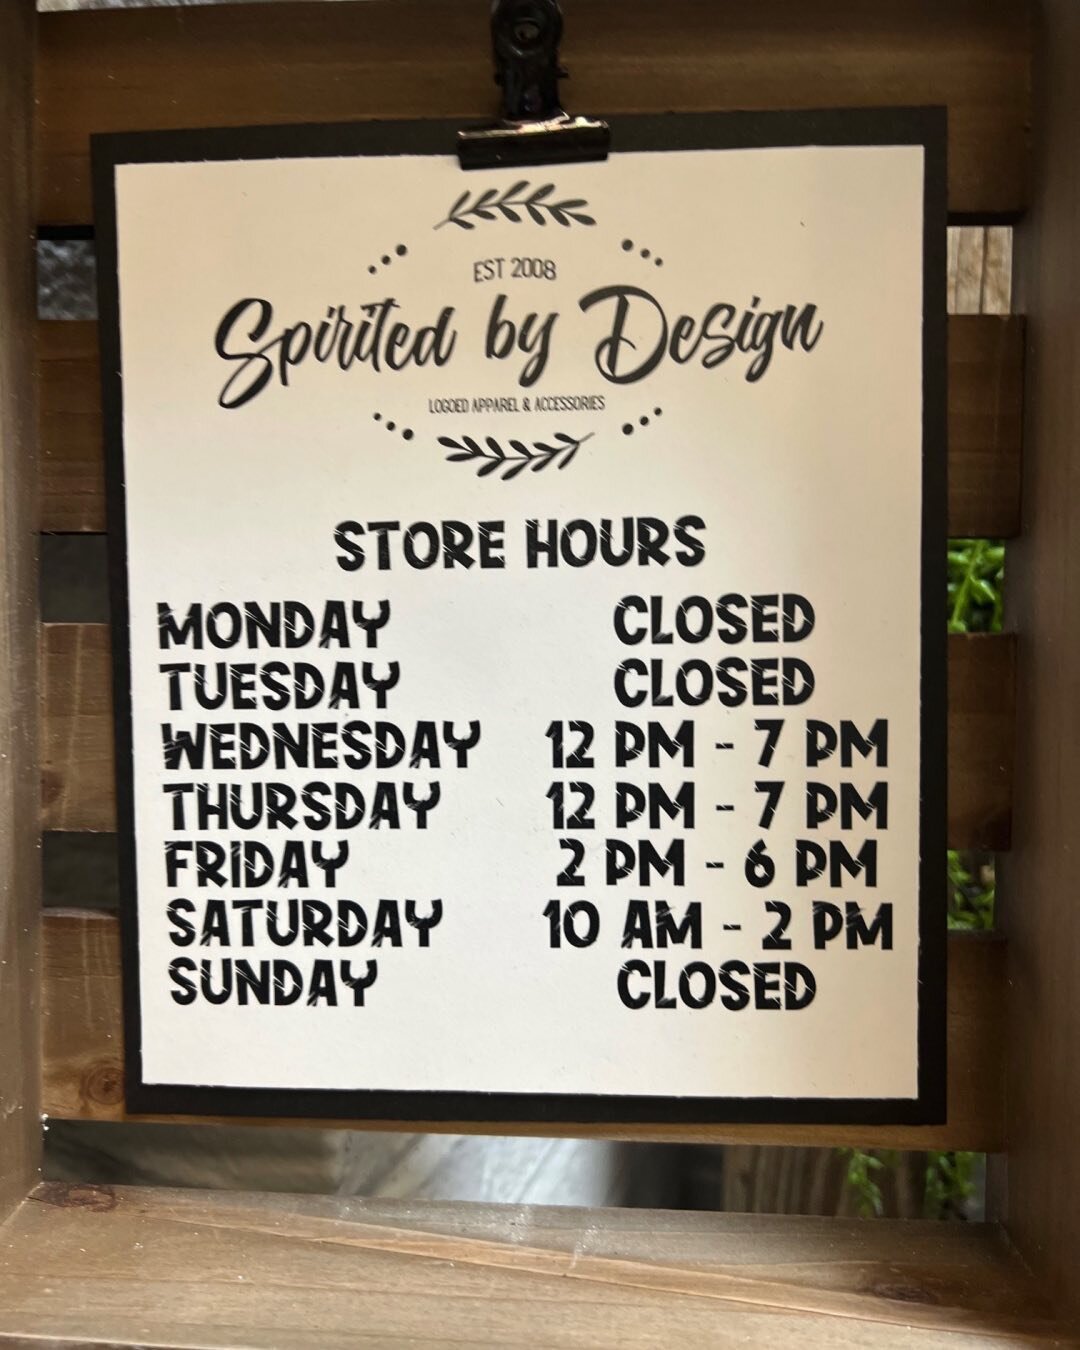 Hey everyone! I apologize for the inconvenience; but Spirited by Design shop is CLOSED for Friday, June 10. Be sure to stop by when we reopen on Saturday where you can enjoy in-store specials &amp; refresh your school spiritwear! Again, apologies for